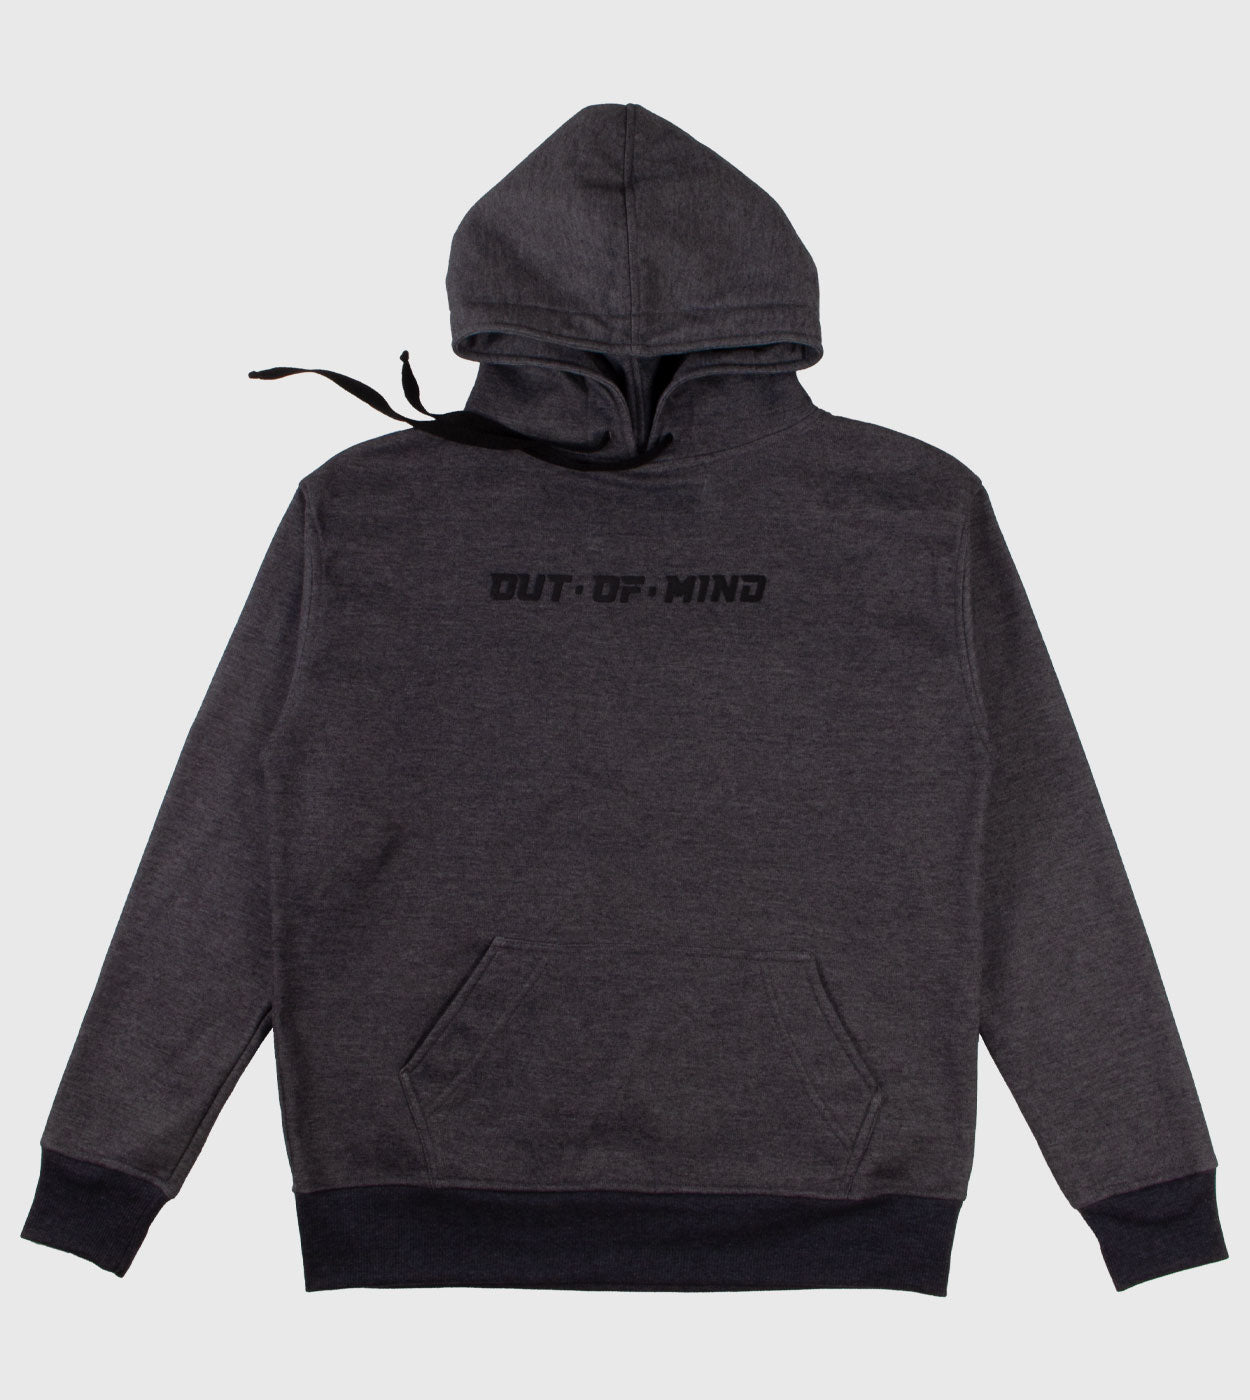 Hoodie "out of mind"